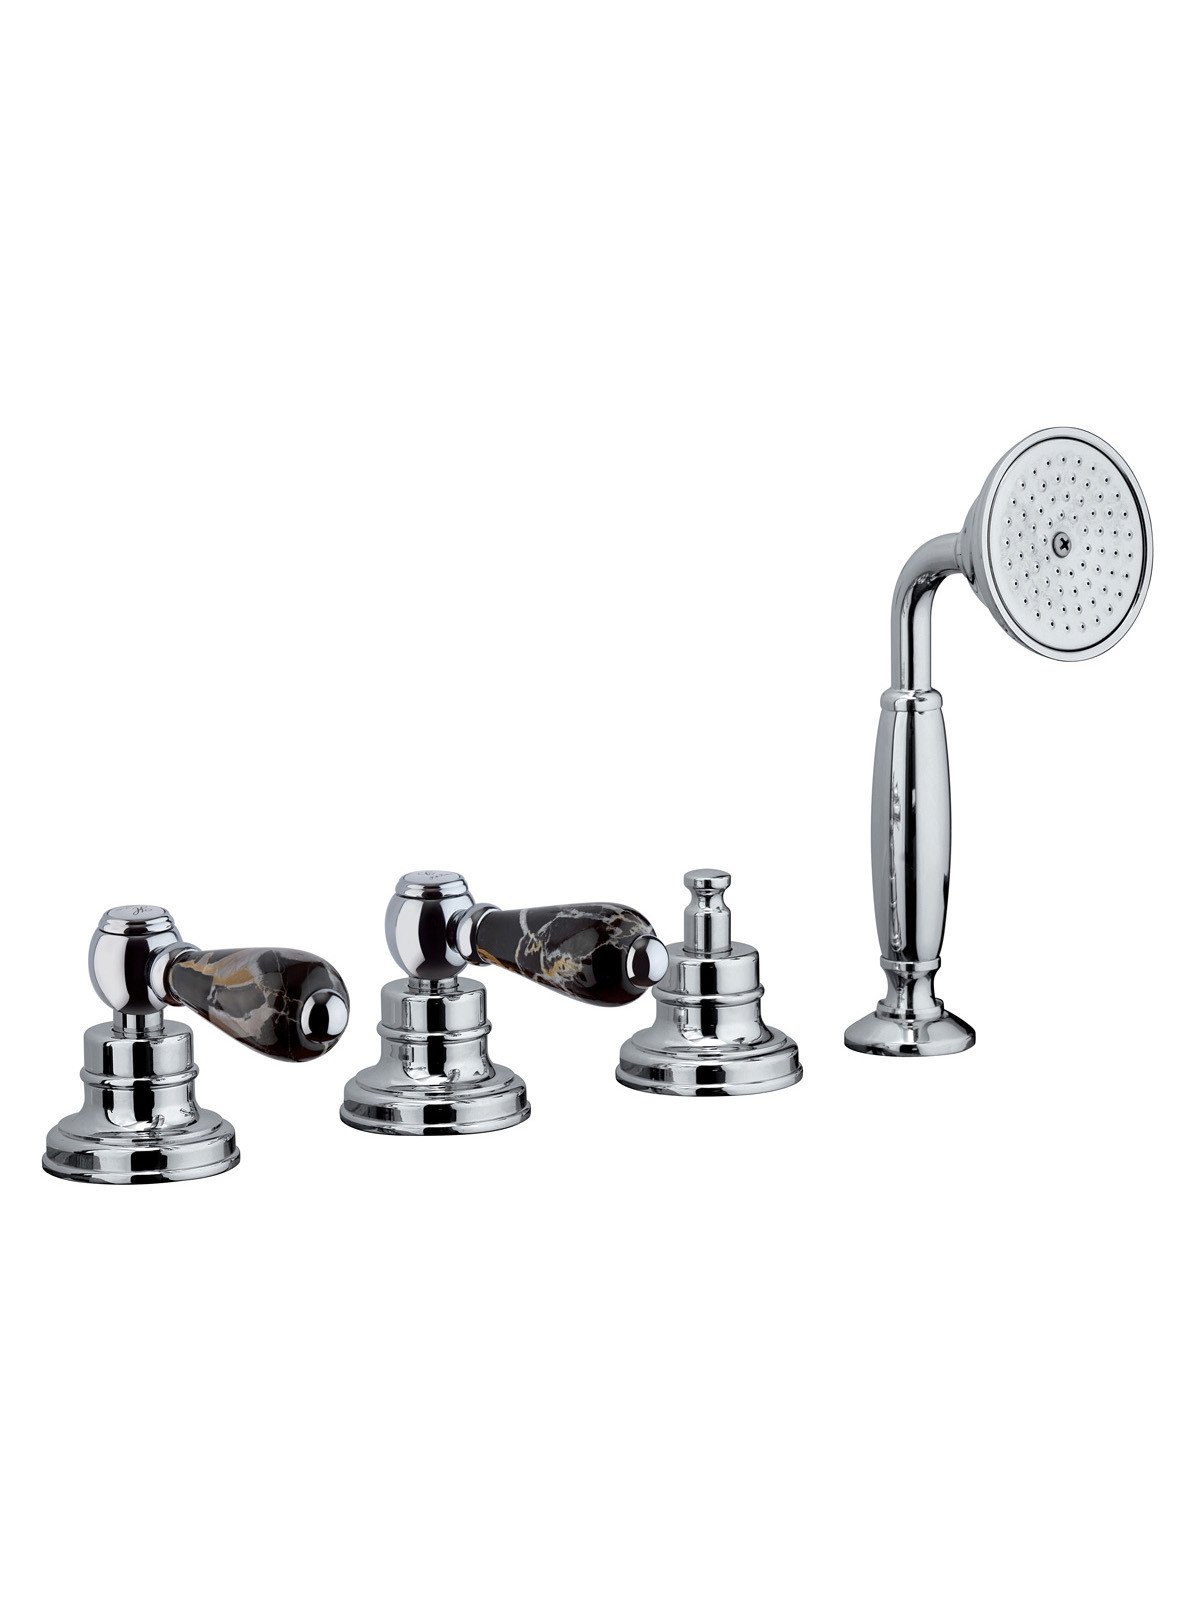 Deck mounted bath mixer with diverter and pull-out shower